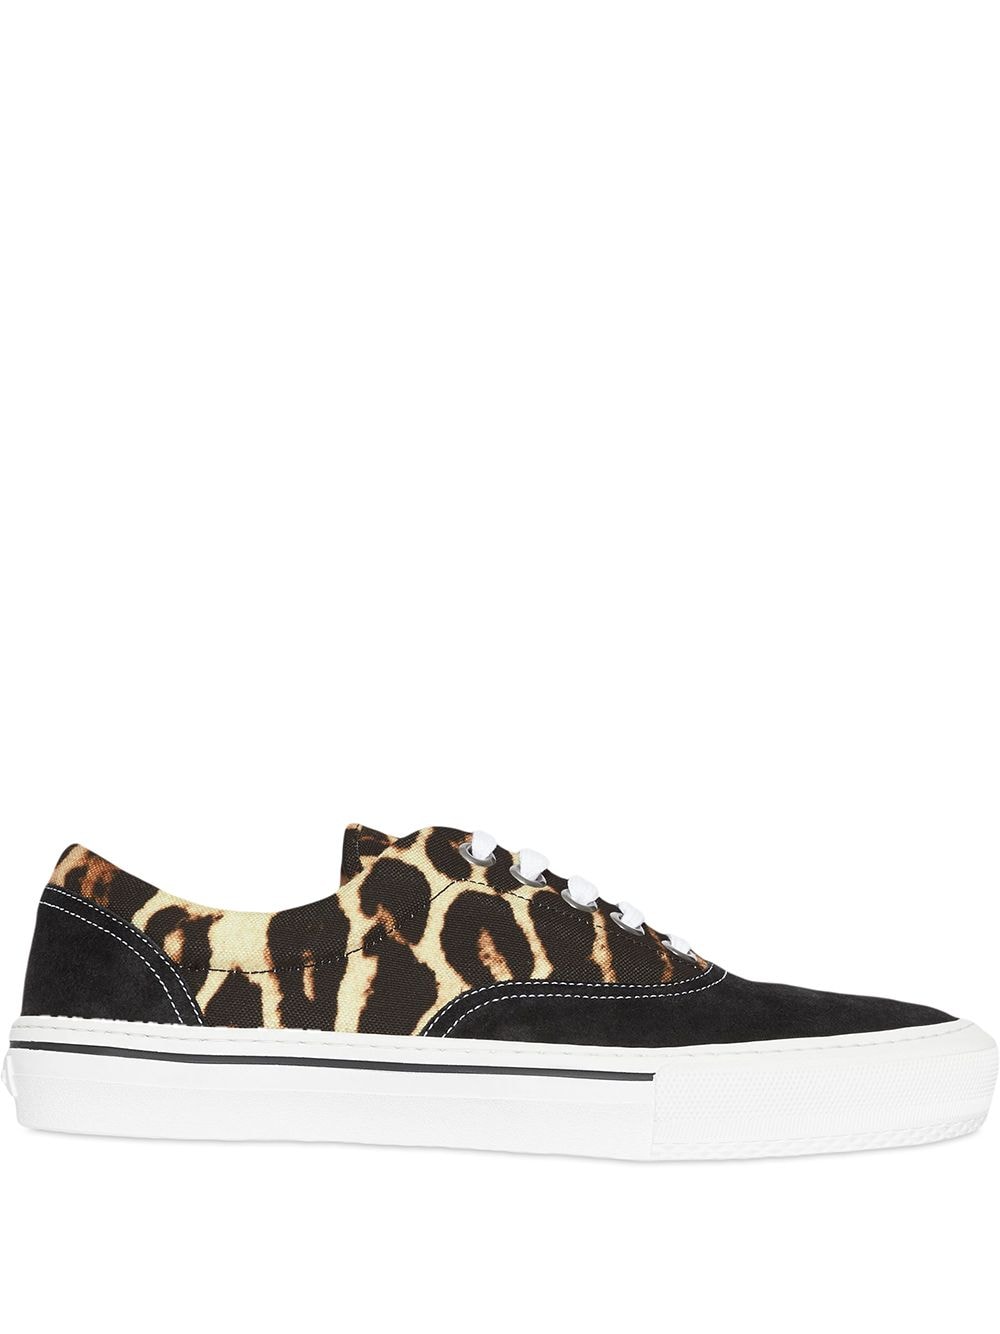 Burberry Leopard Print Sneakers Aw19 